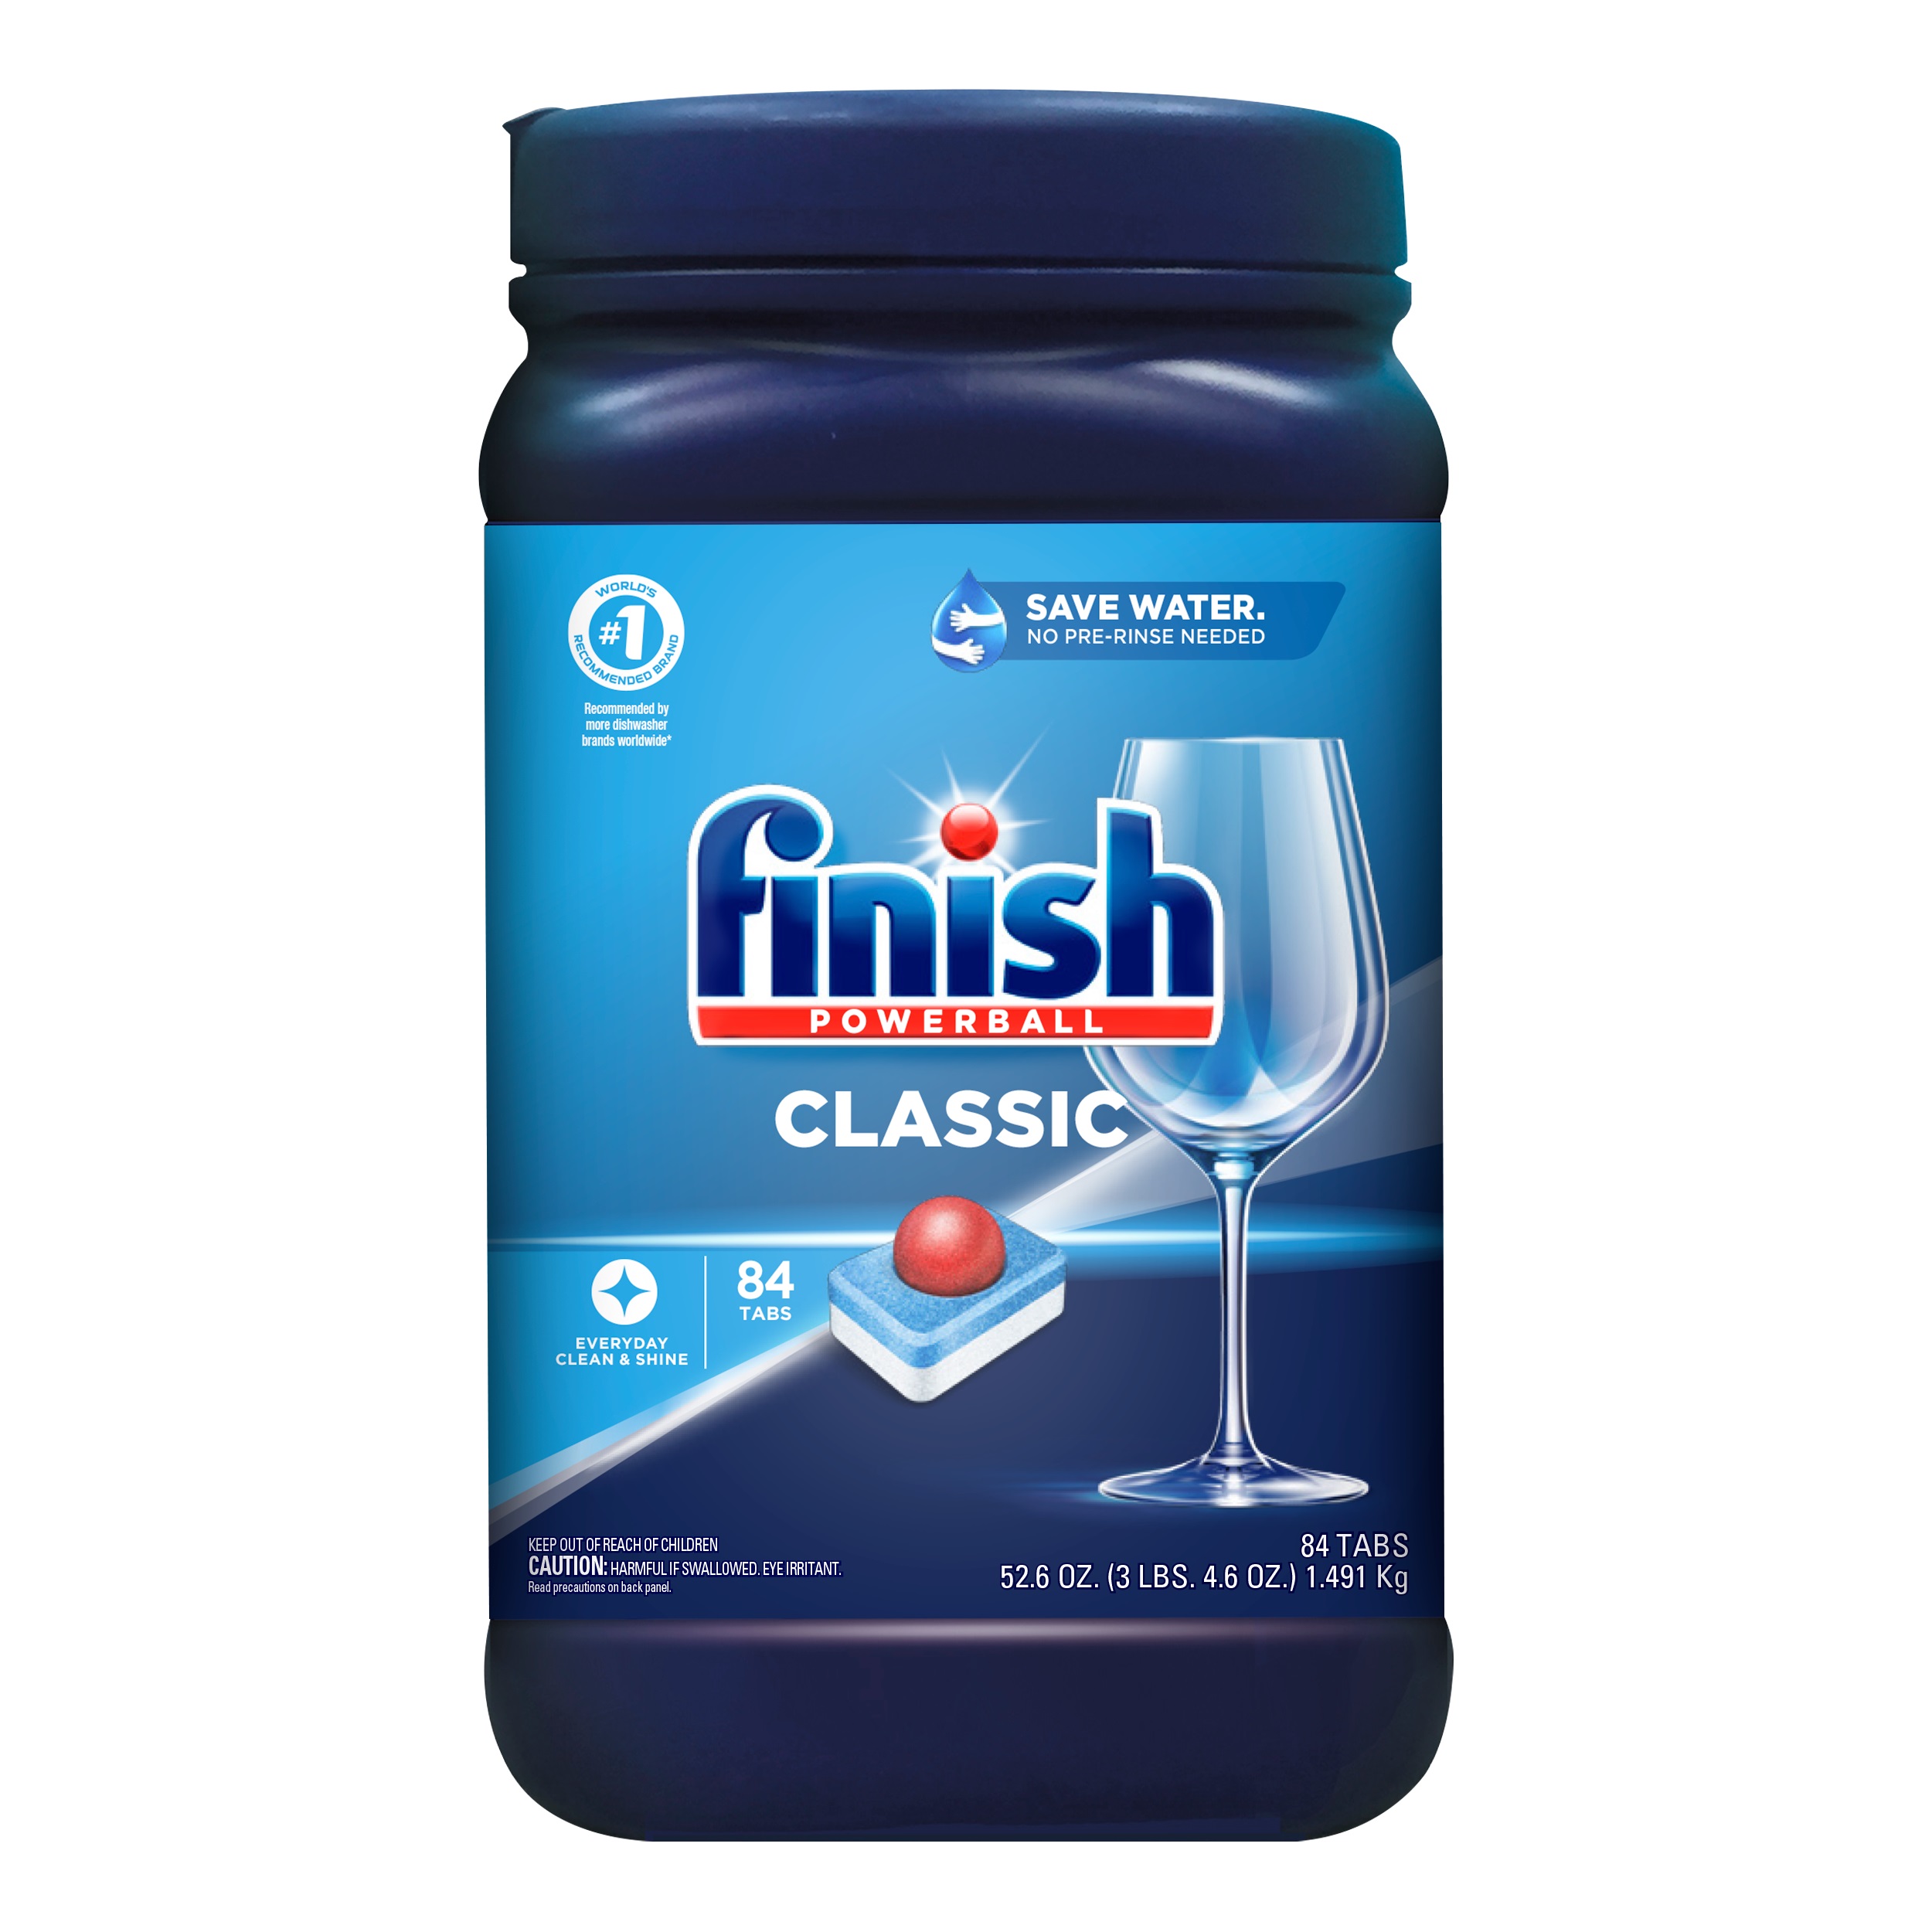 FINISH POWERBALL Classic Canister